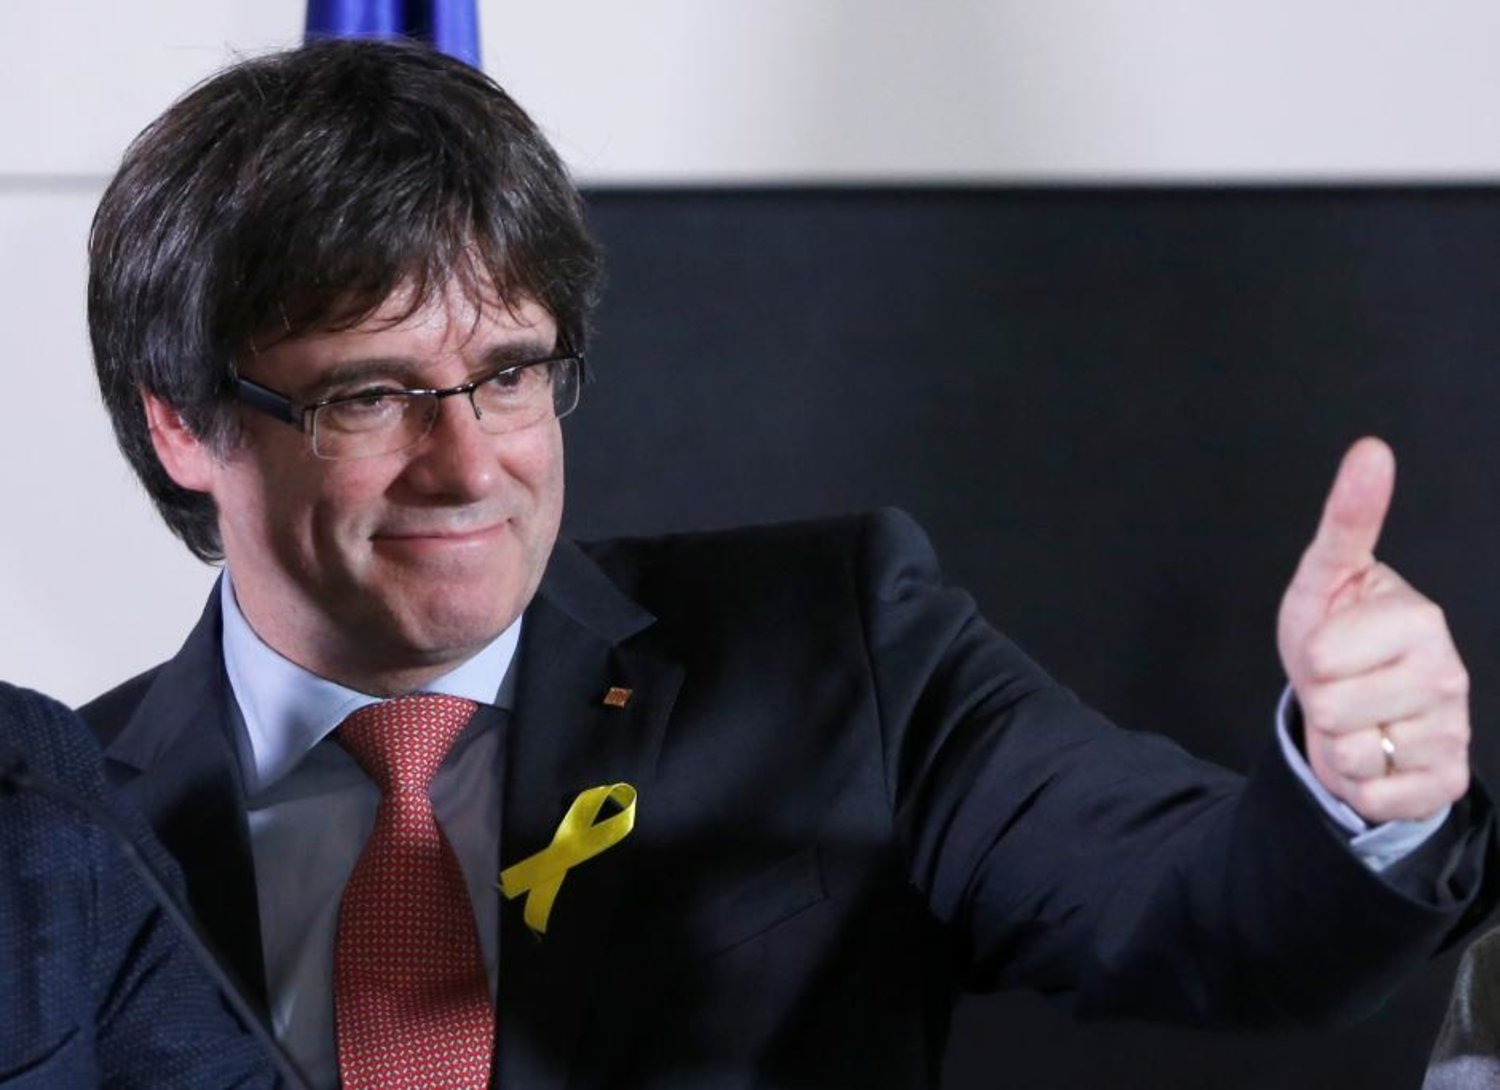 Carles Puigdemont, the dismissed President of Catalonia, arrives to speak after watching the results of Catalonia's regional election in Brussels, Belgium, December 21, 2017. (Reuters)